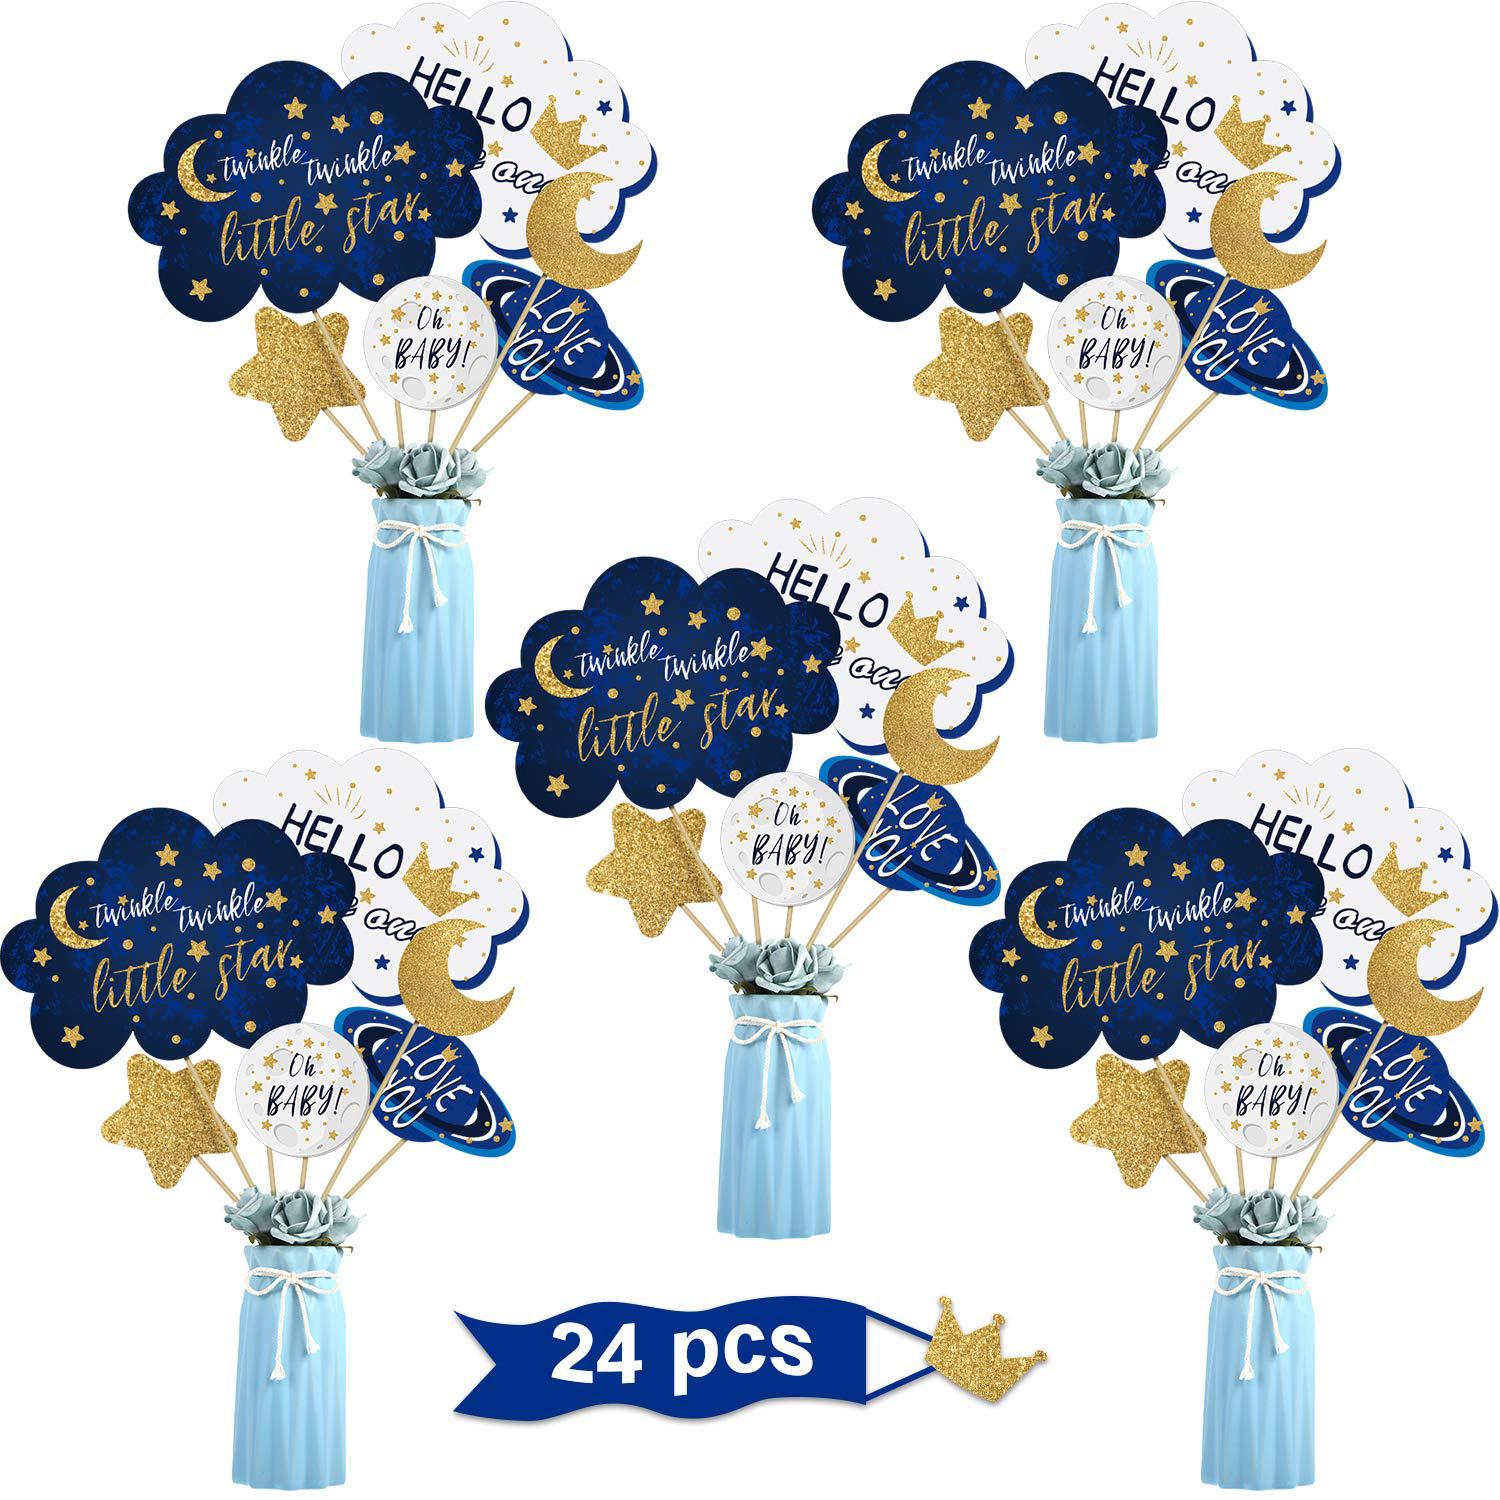 BOAO 24 pieces twinkle twinkle little star centerpiece sticks for star party table toppers wood decoration baby shower birthday pa